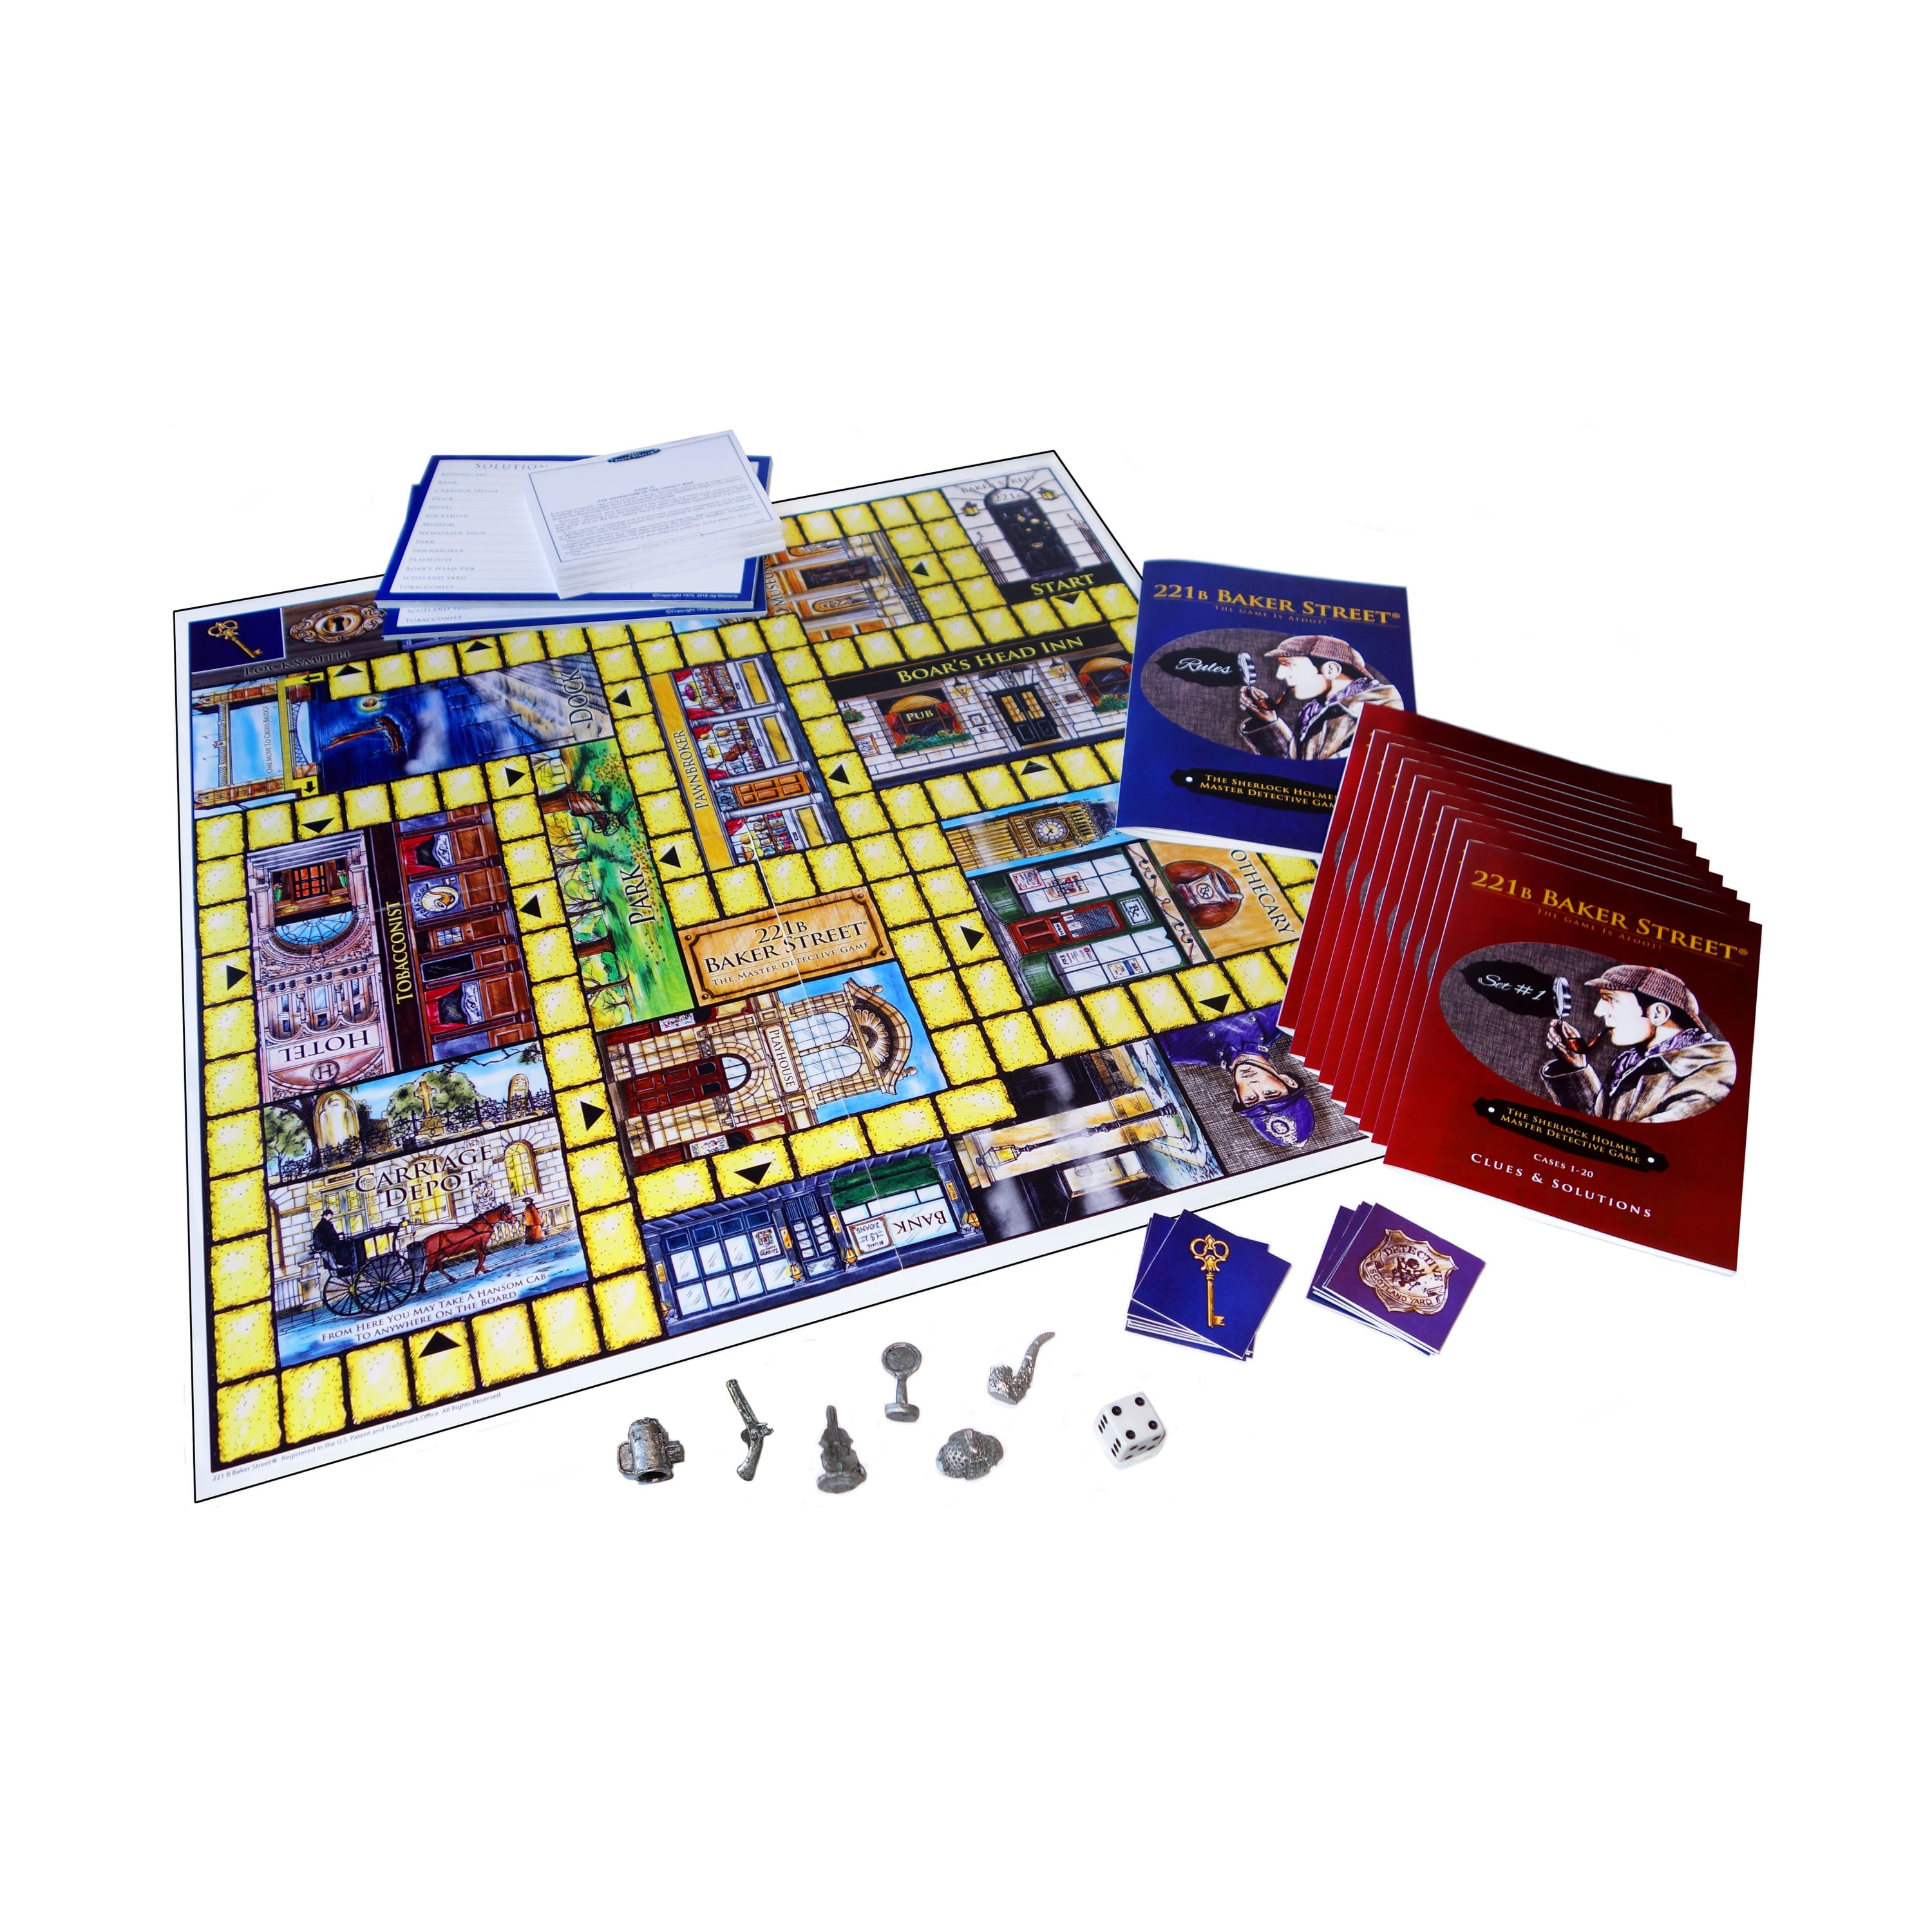 221B Baker Street&#xAE; The Master Detective Game, Deluxe Edition